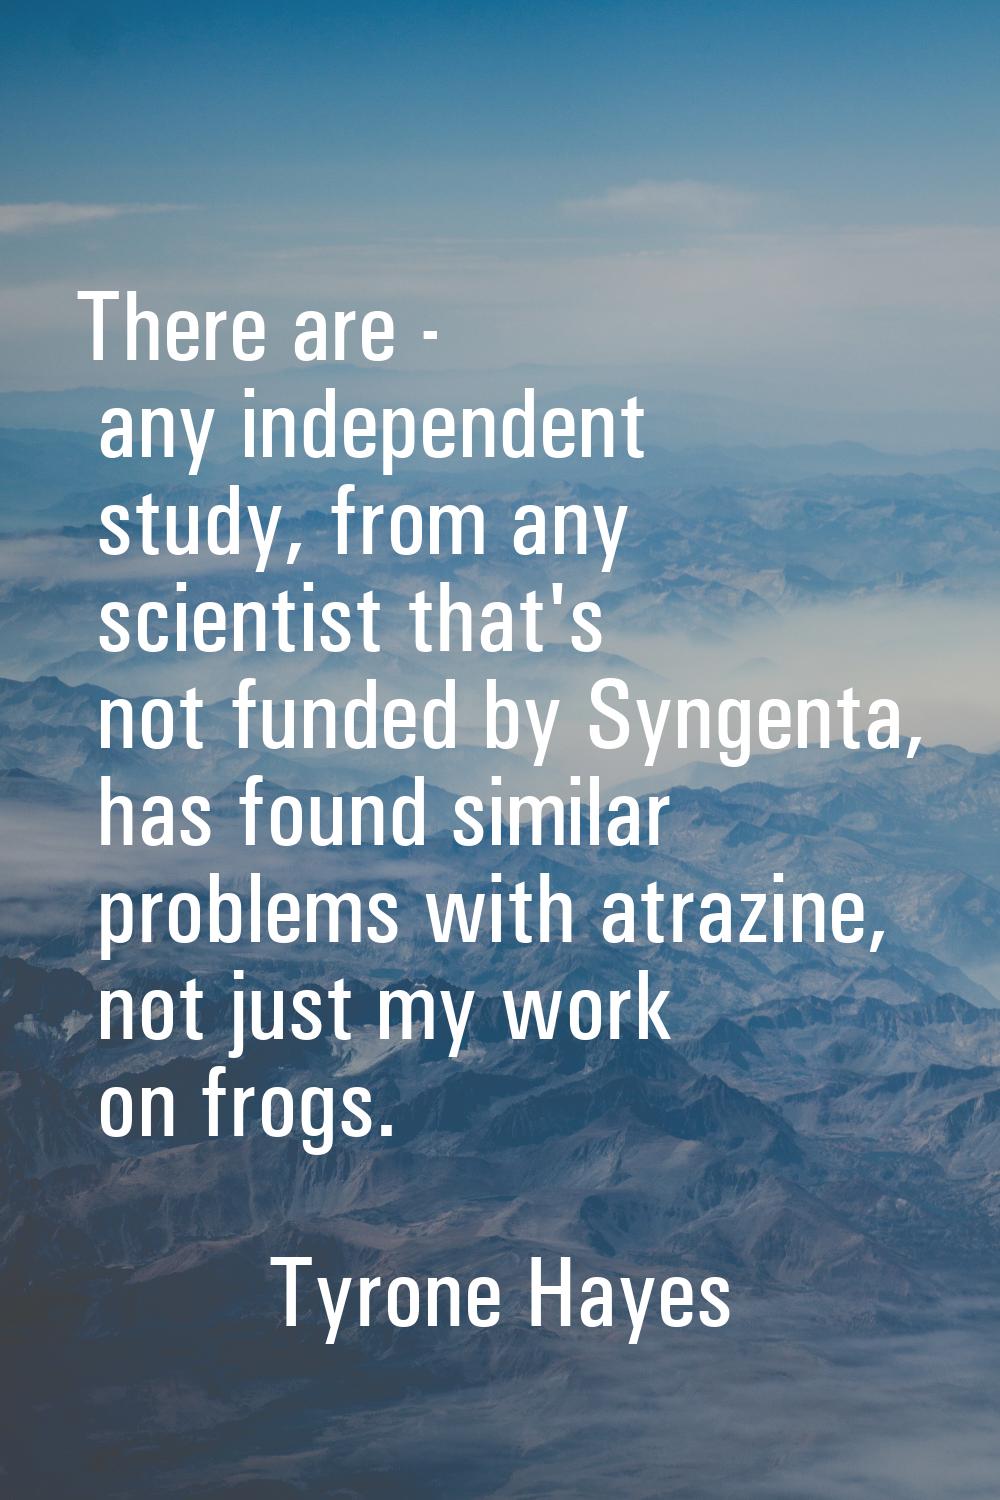 There are - any independent study, from any scientist that's not funded by Syngenta, has found simi